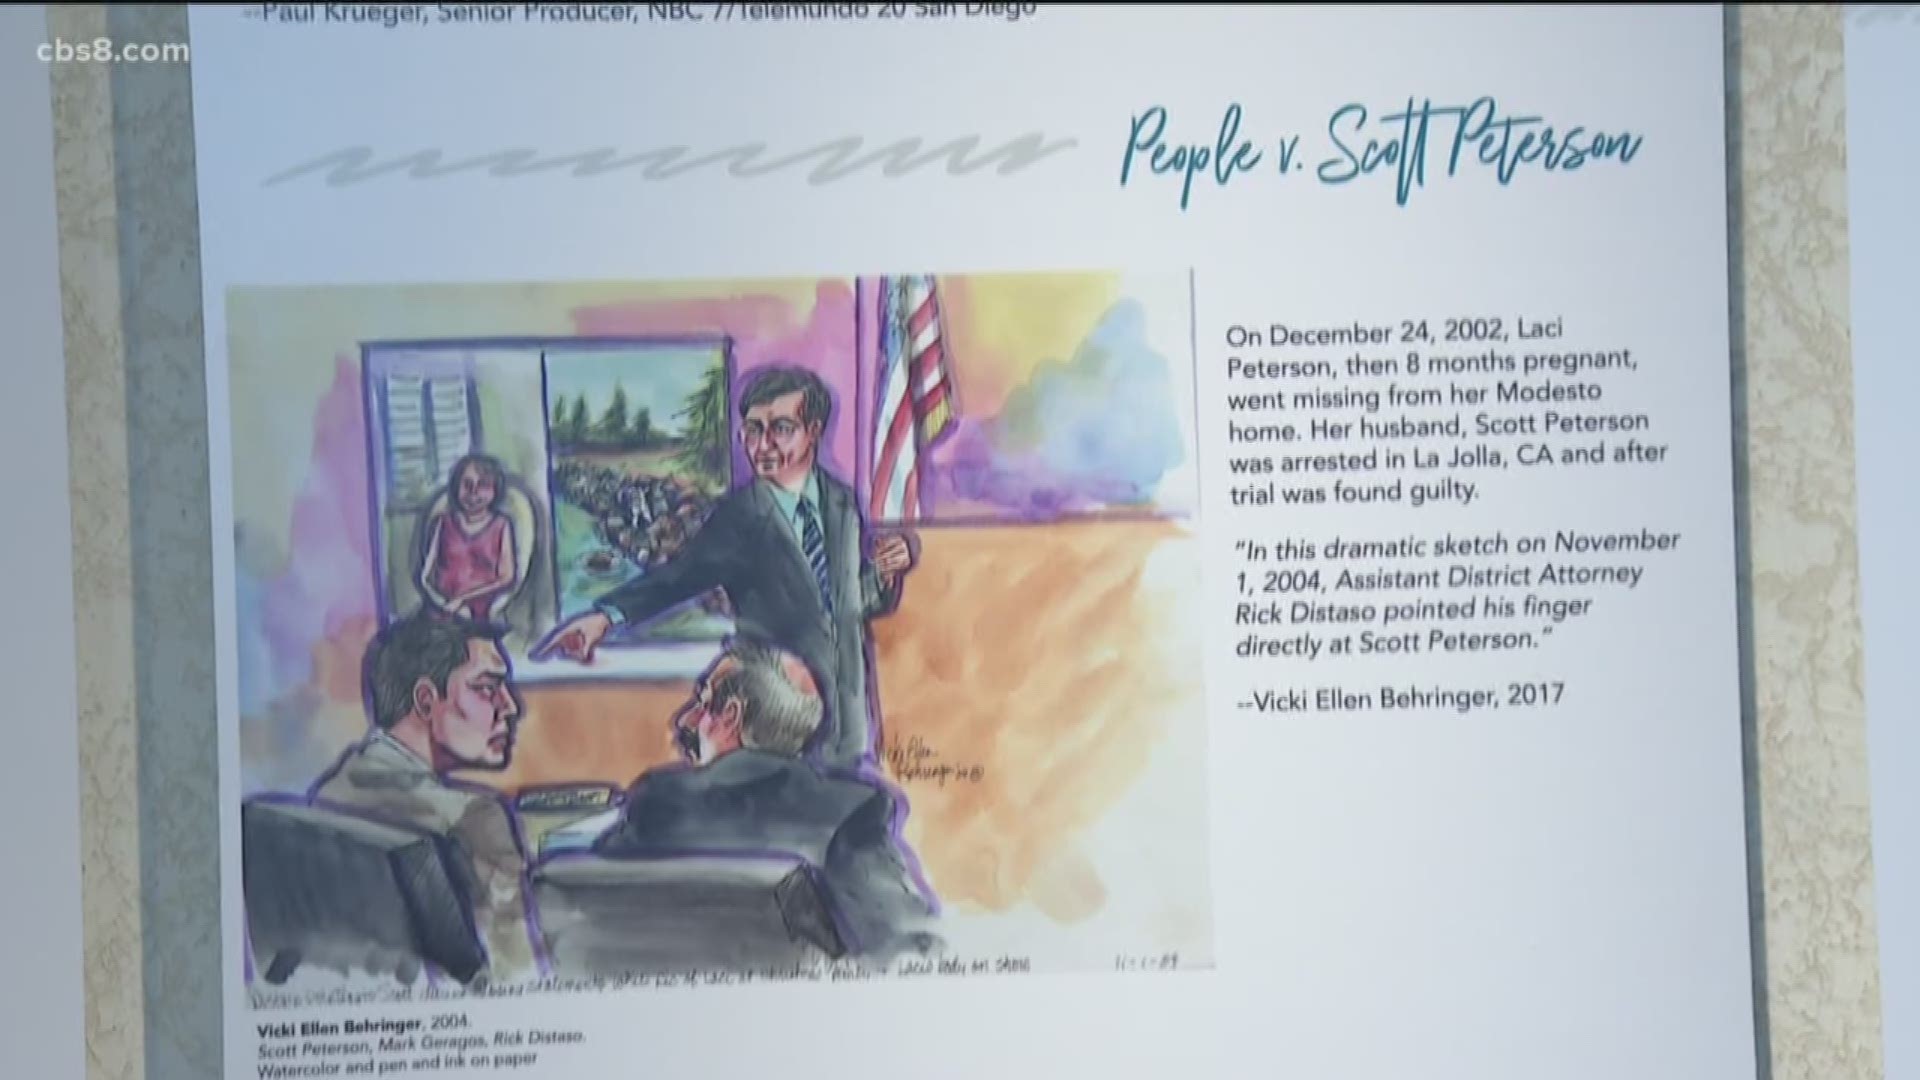 There is a sketchy new art exhibit at the federal courthouse downtown San Diego called, “Portraits of Justice."